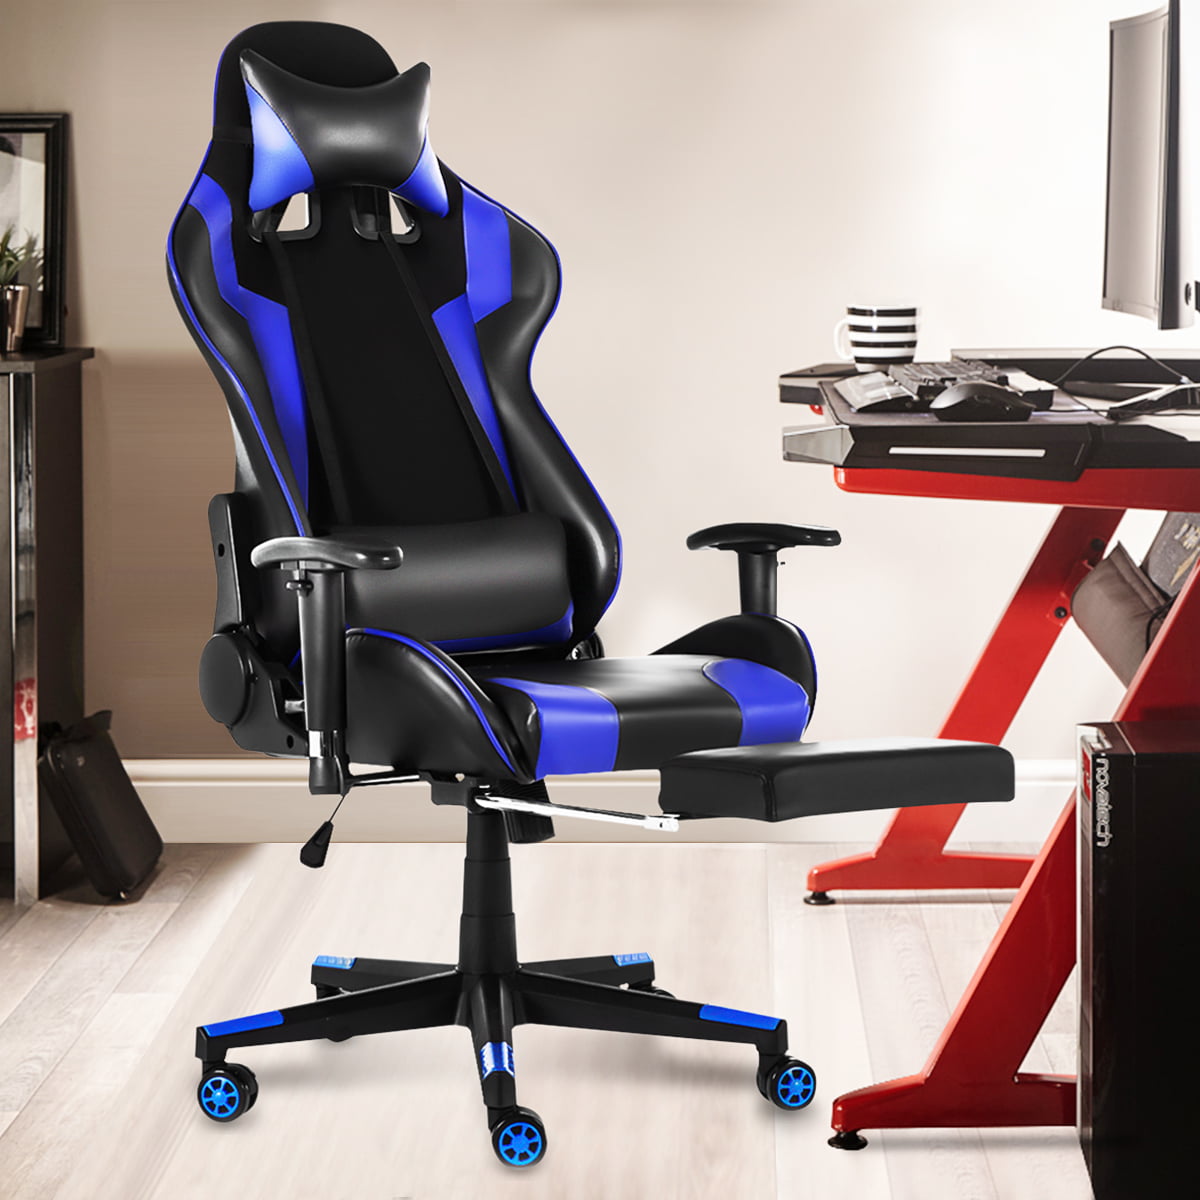 Details about   Racing Gaming Chair Office PC Swivel Leather Recliner High Back Task w/Footrest 